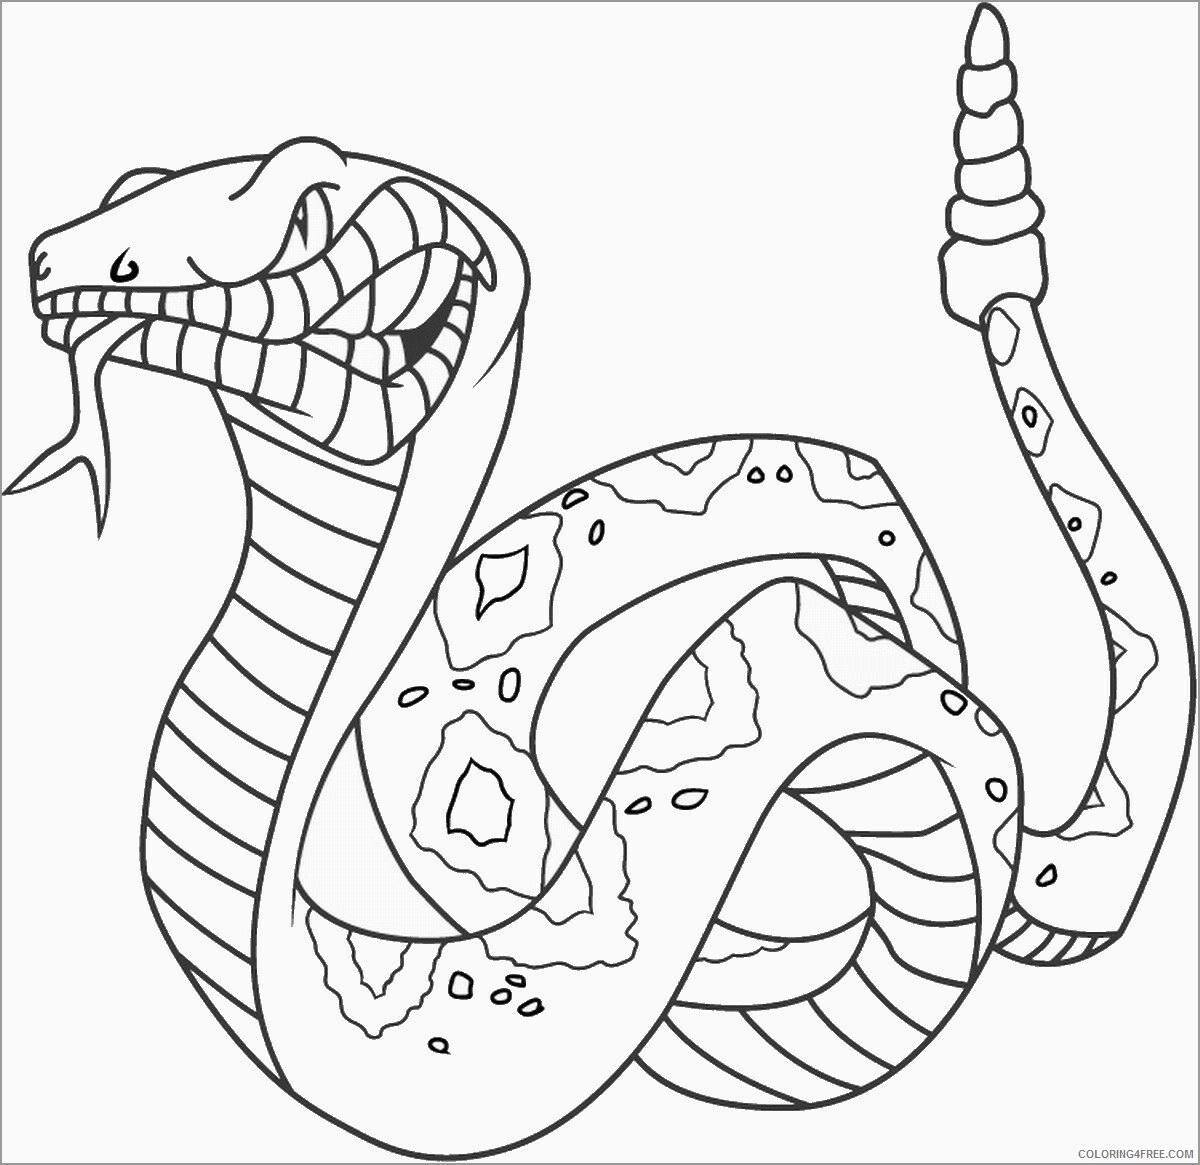 Adult Coloring Pages snake for adult Printable 2020 073 Coloring4free